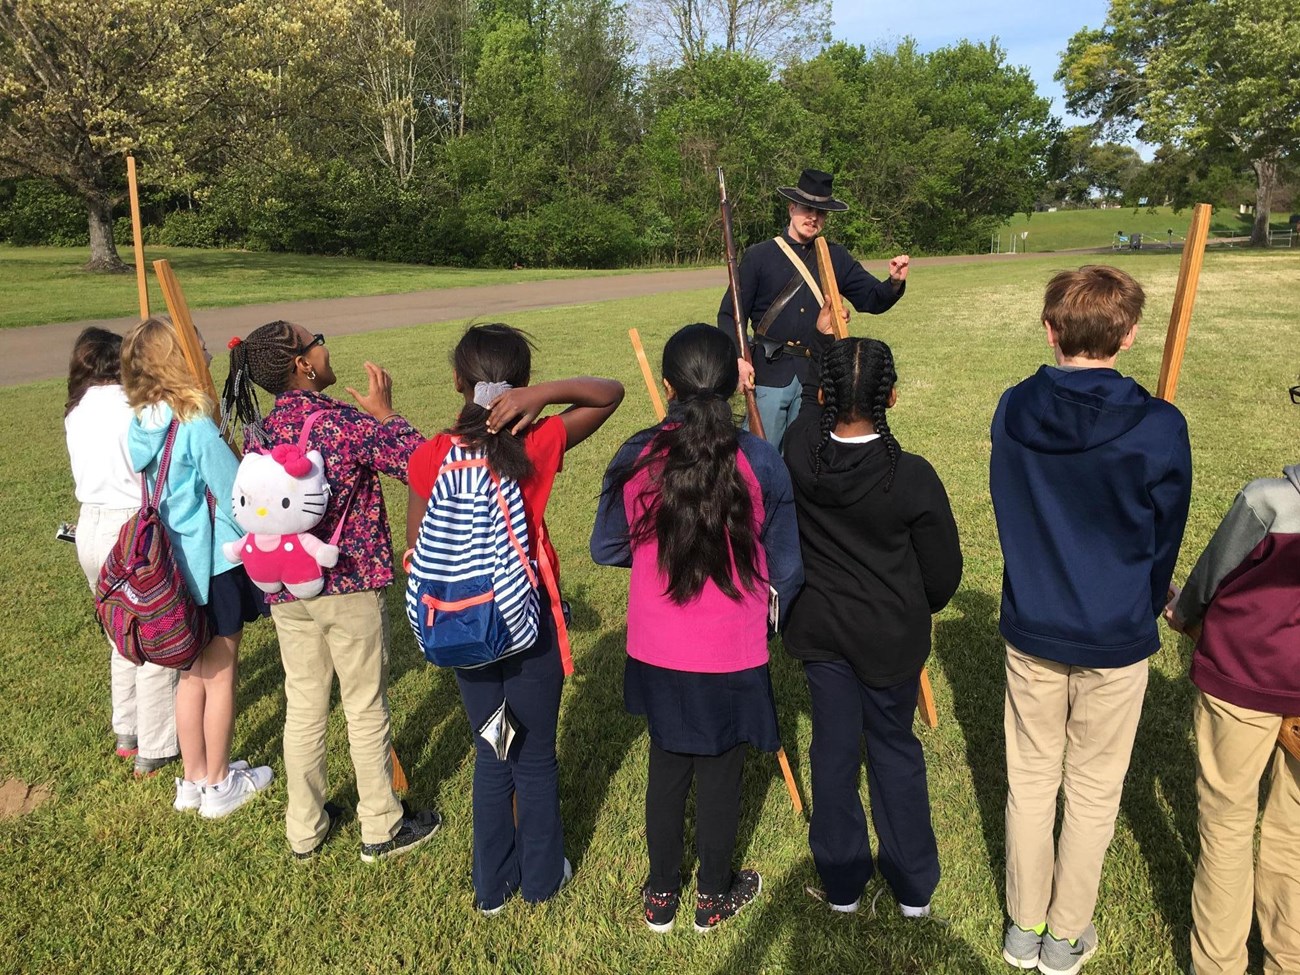 A park ranger dressed as a Union soldier talks to children holding wooden muskets.